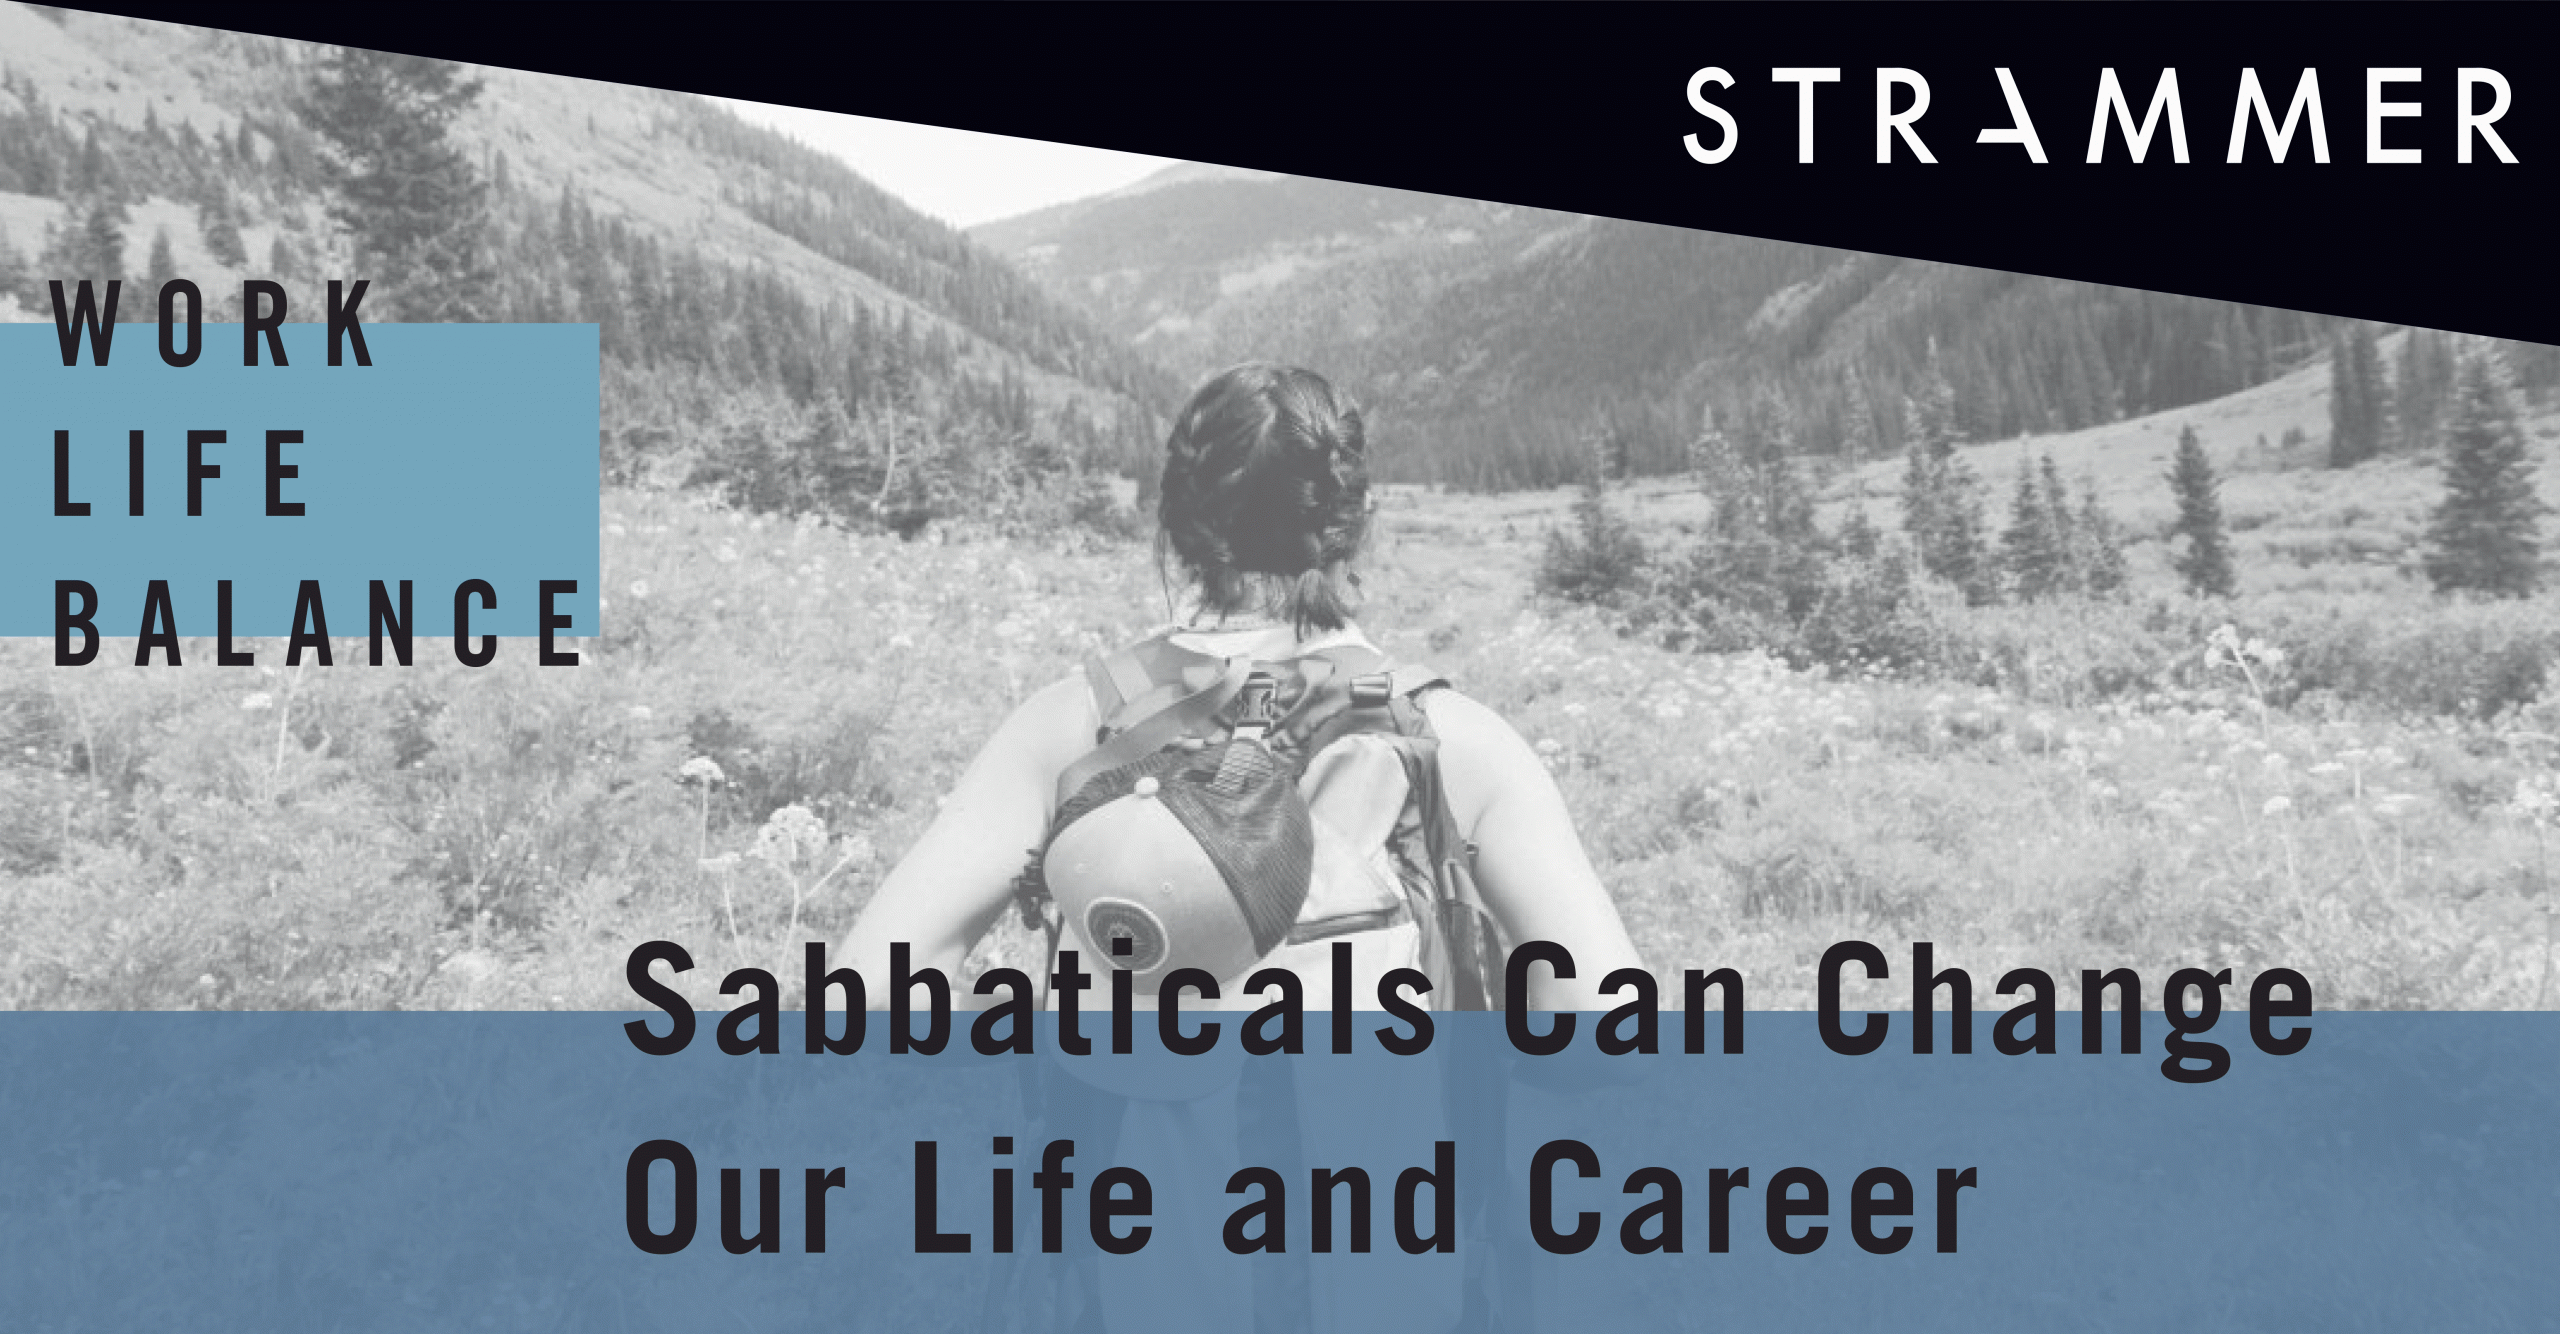 Sabbatical: How Can It Help Workers?